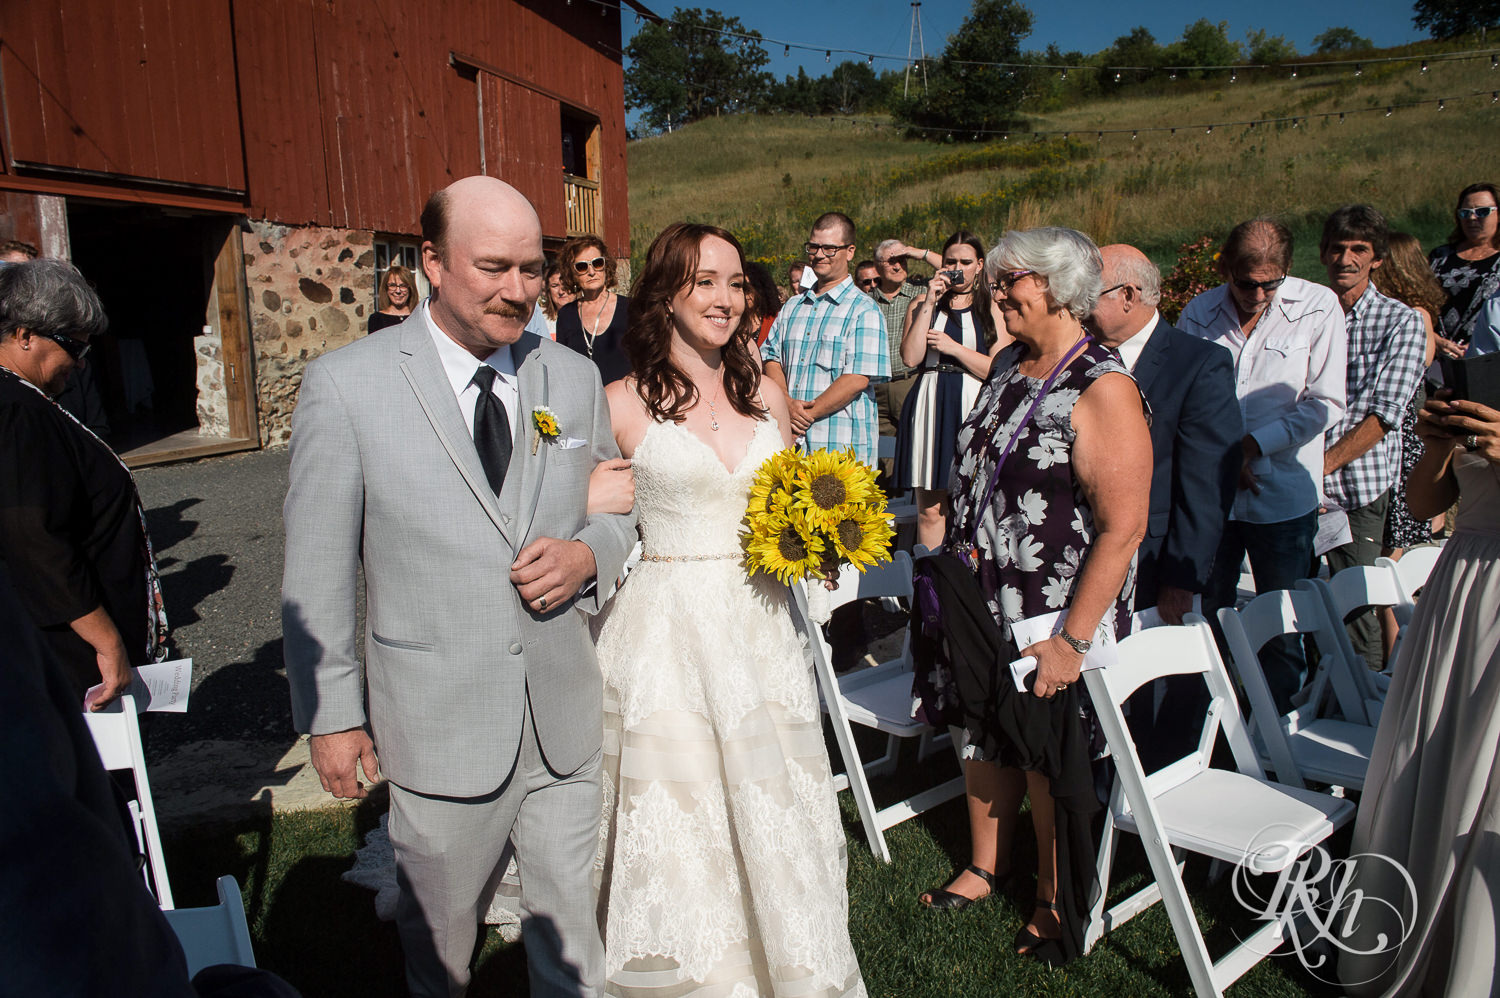 Bride and dad walk down the aisle during barn wedding ceremony at Birch Hill Barn in Glenwood City, Wisconsin.